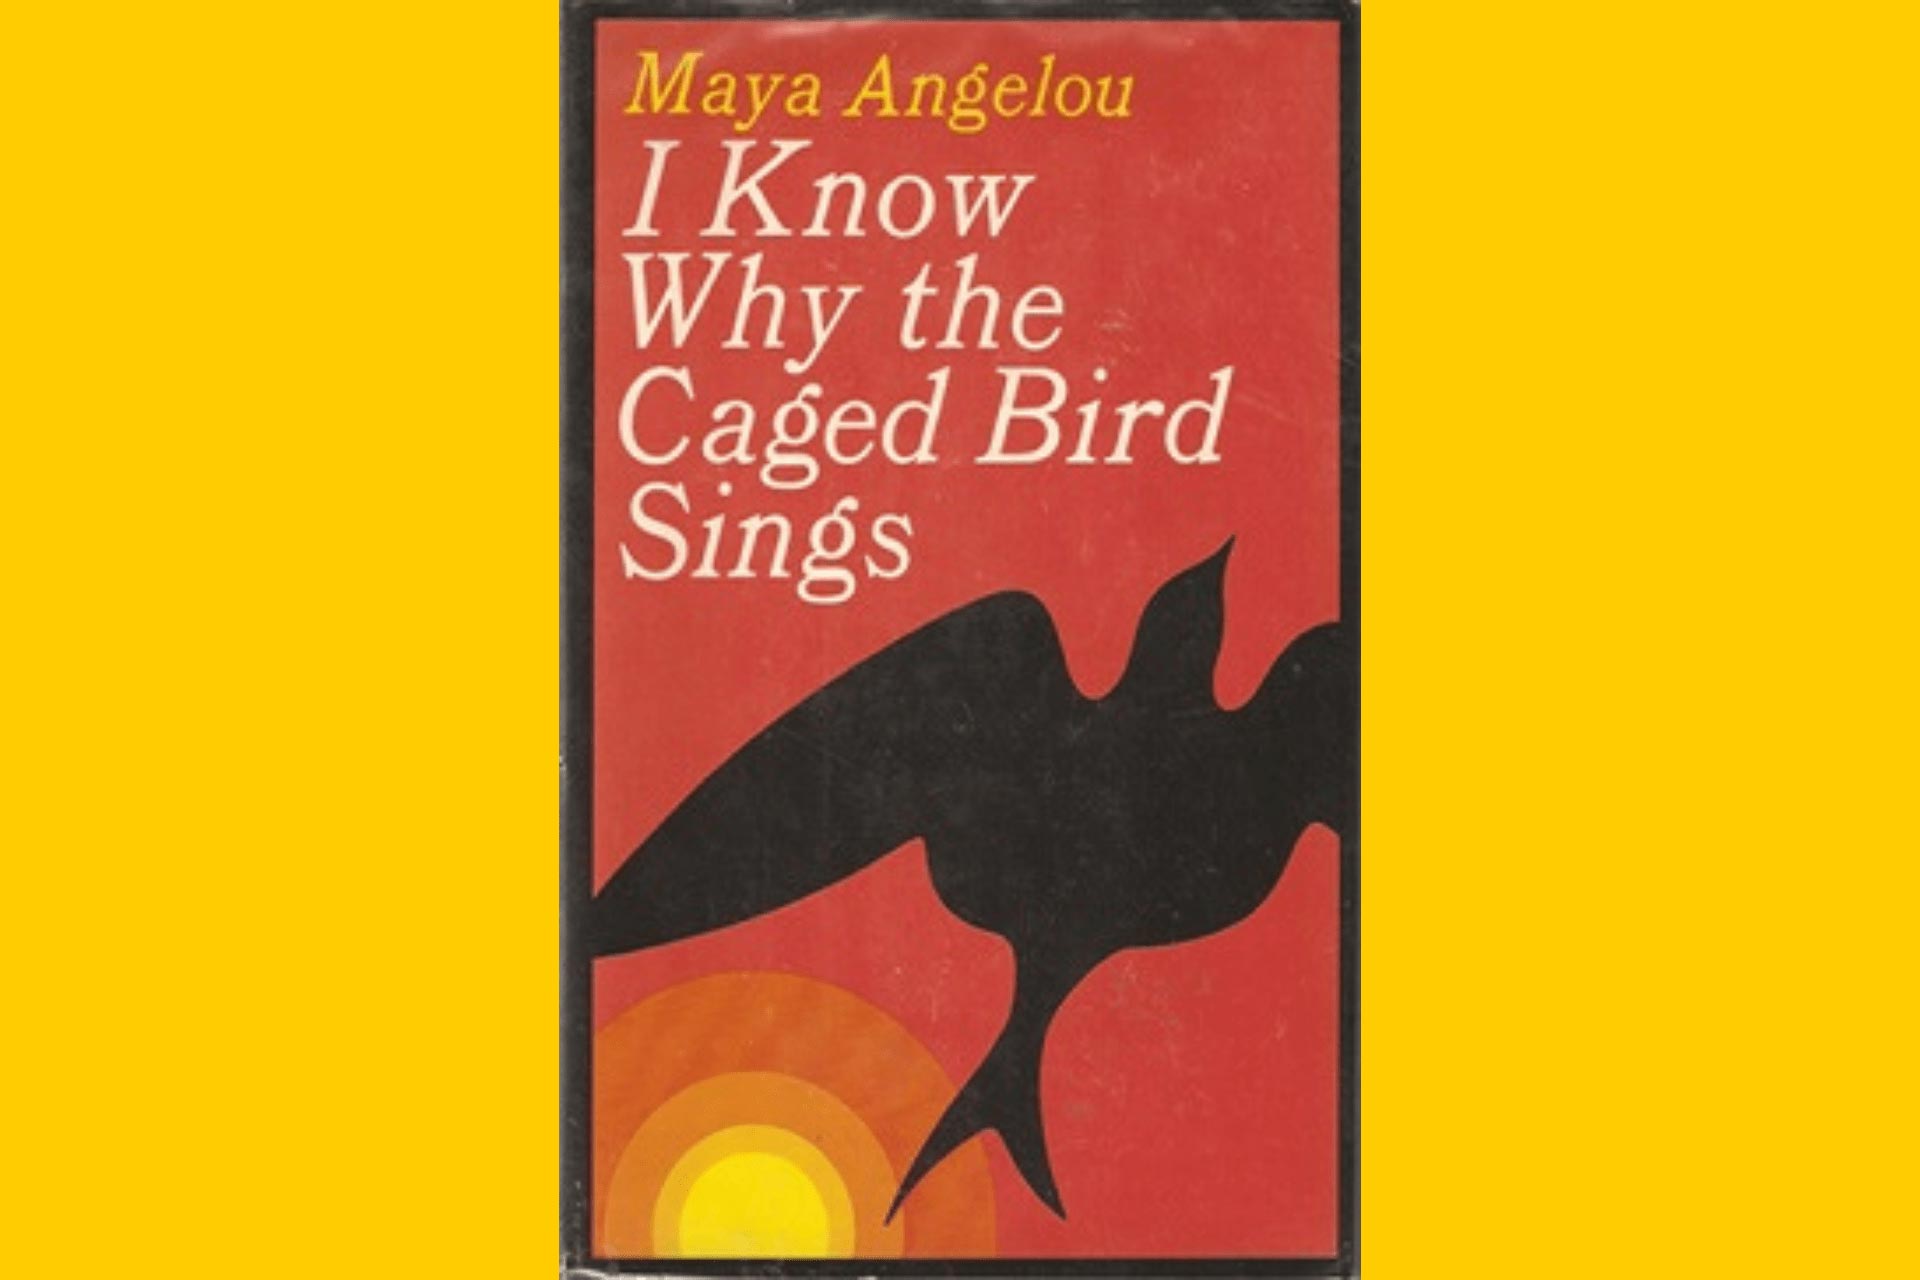 i know why the caged bird sings maya angelou autobiography